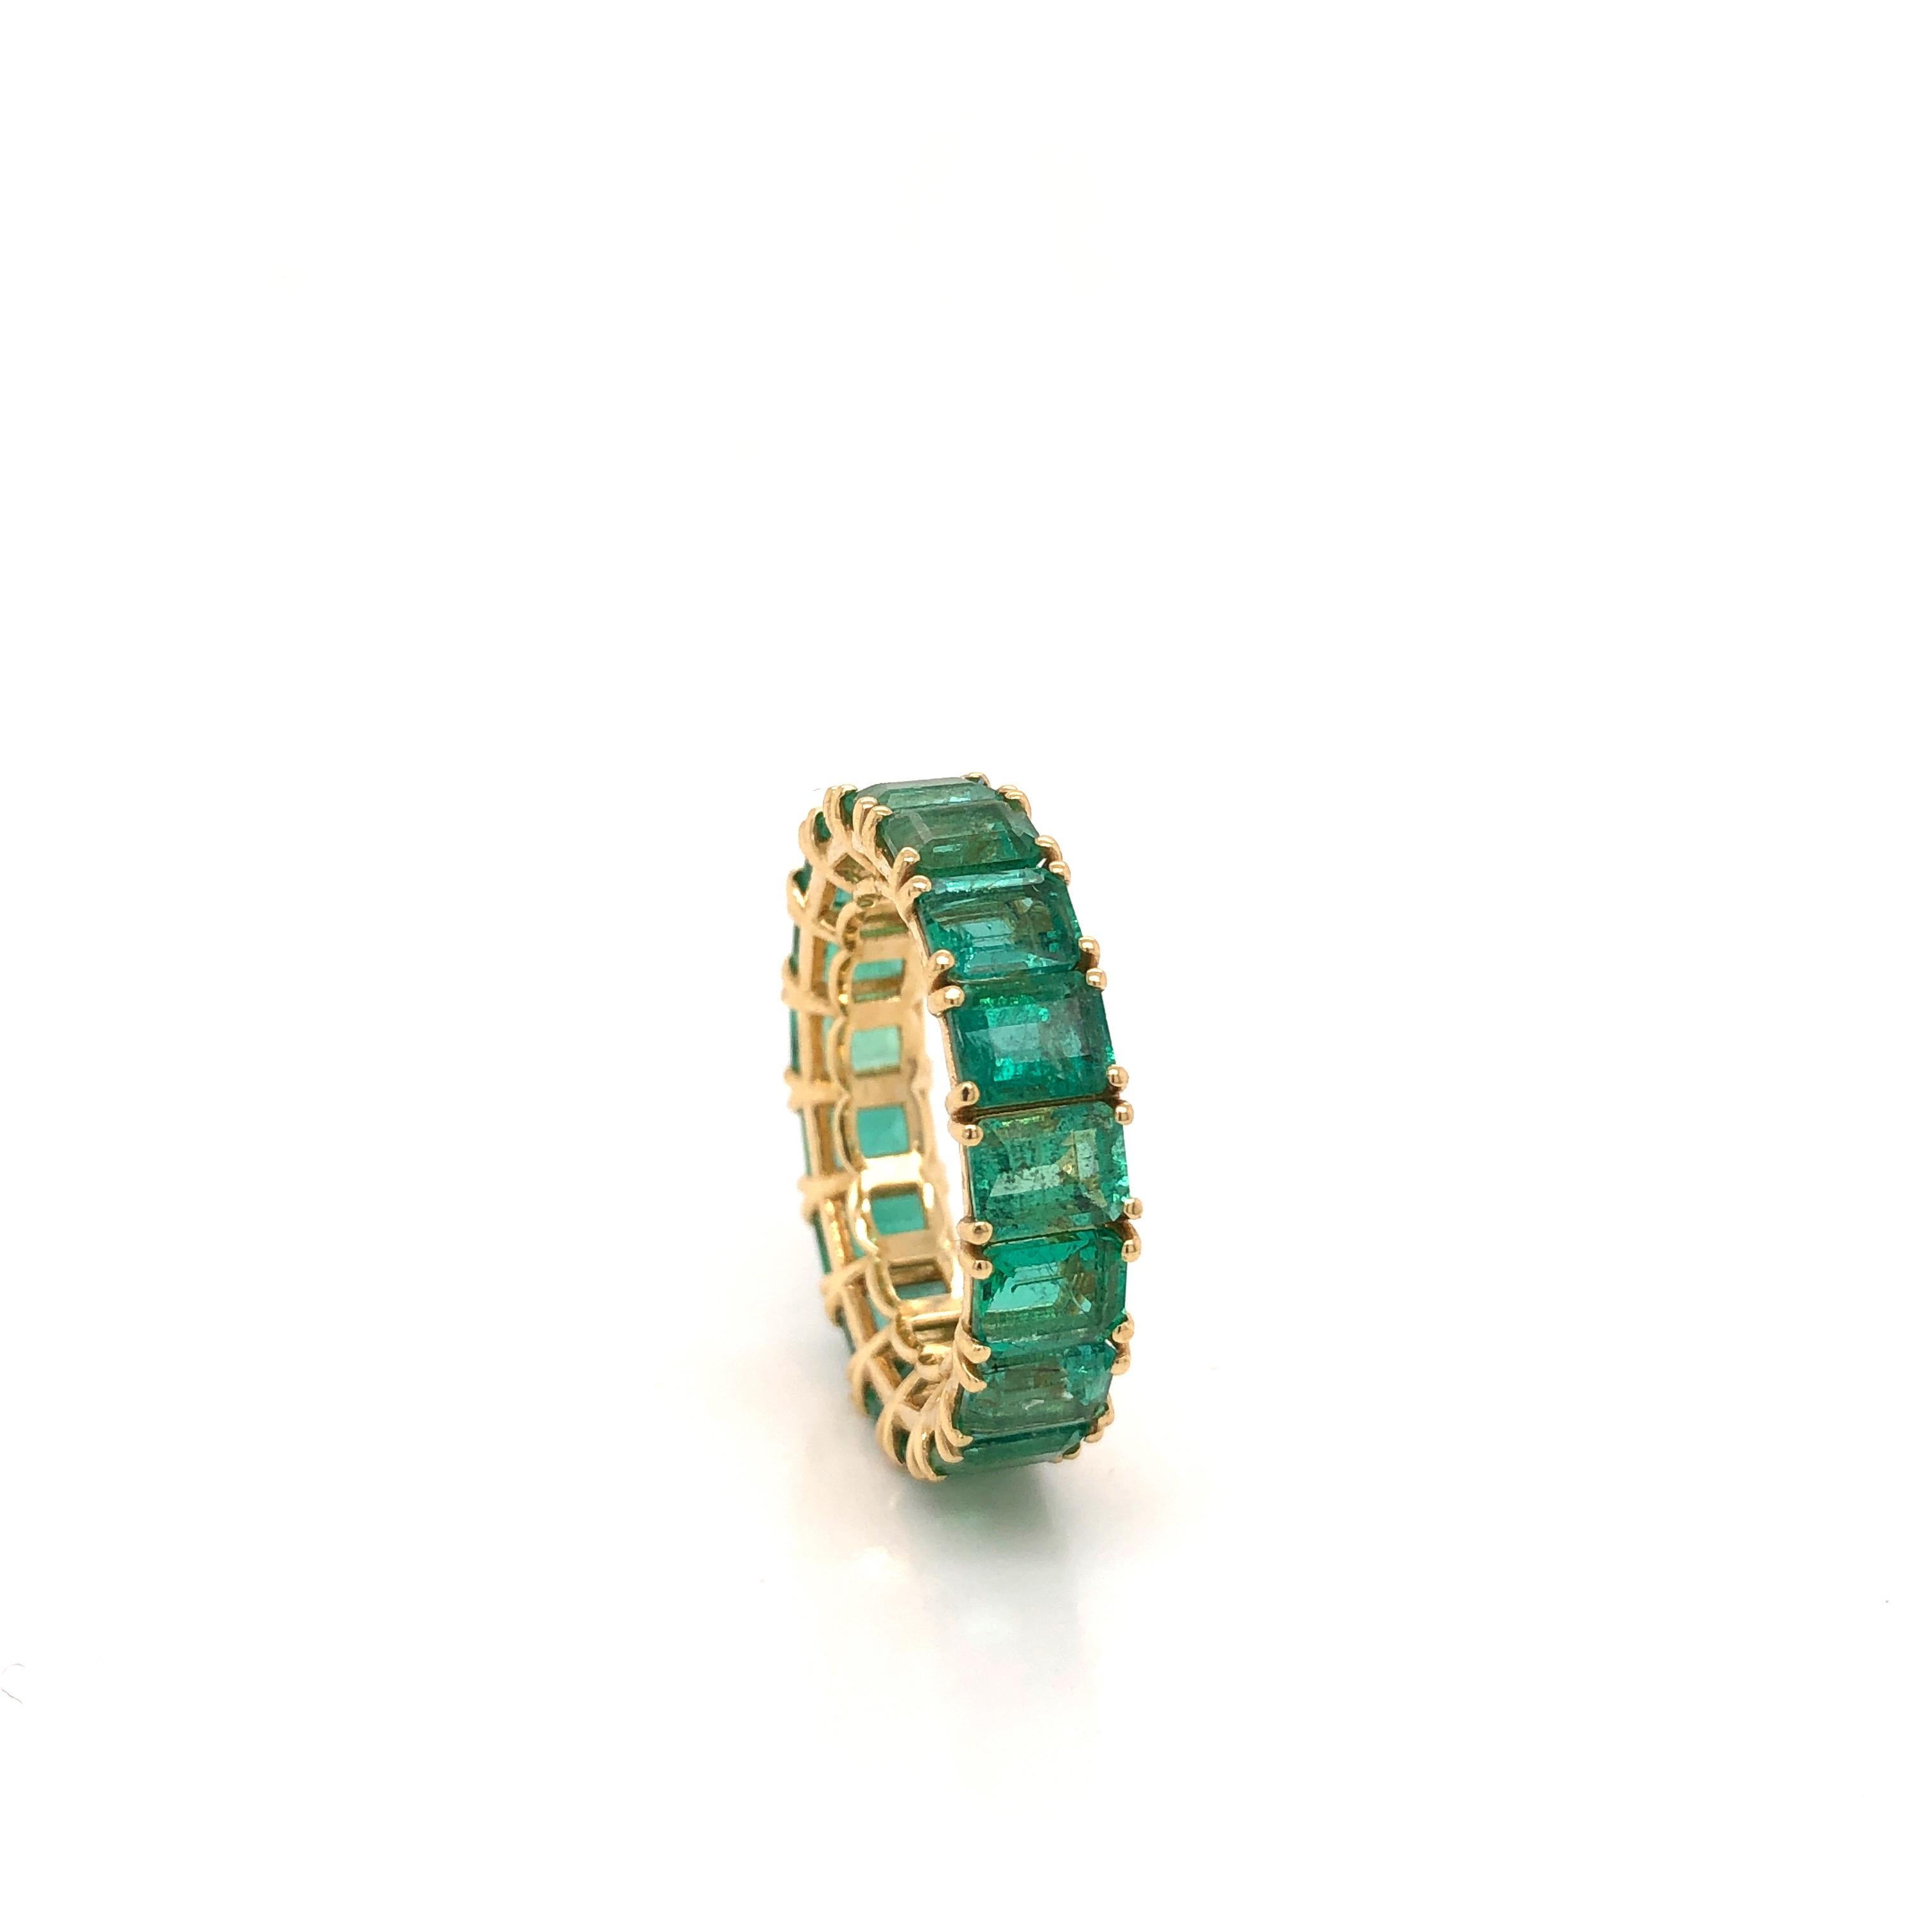 Amazing hand crafted 18k yellow gold Colombian Emerald eternity band. This ring is truly breathtaking. Each stone was matched to perfection to create this one of a kind ring. Seventeen Emeralds are set into this band, all showing a vibrant green